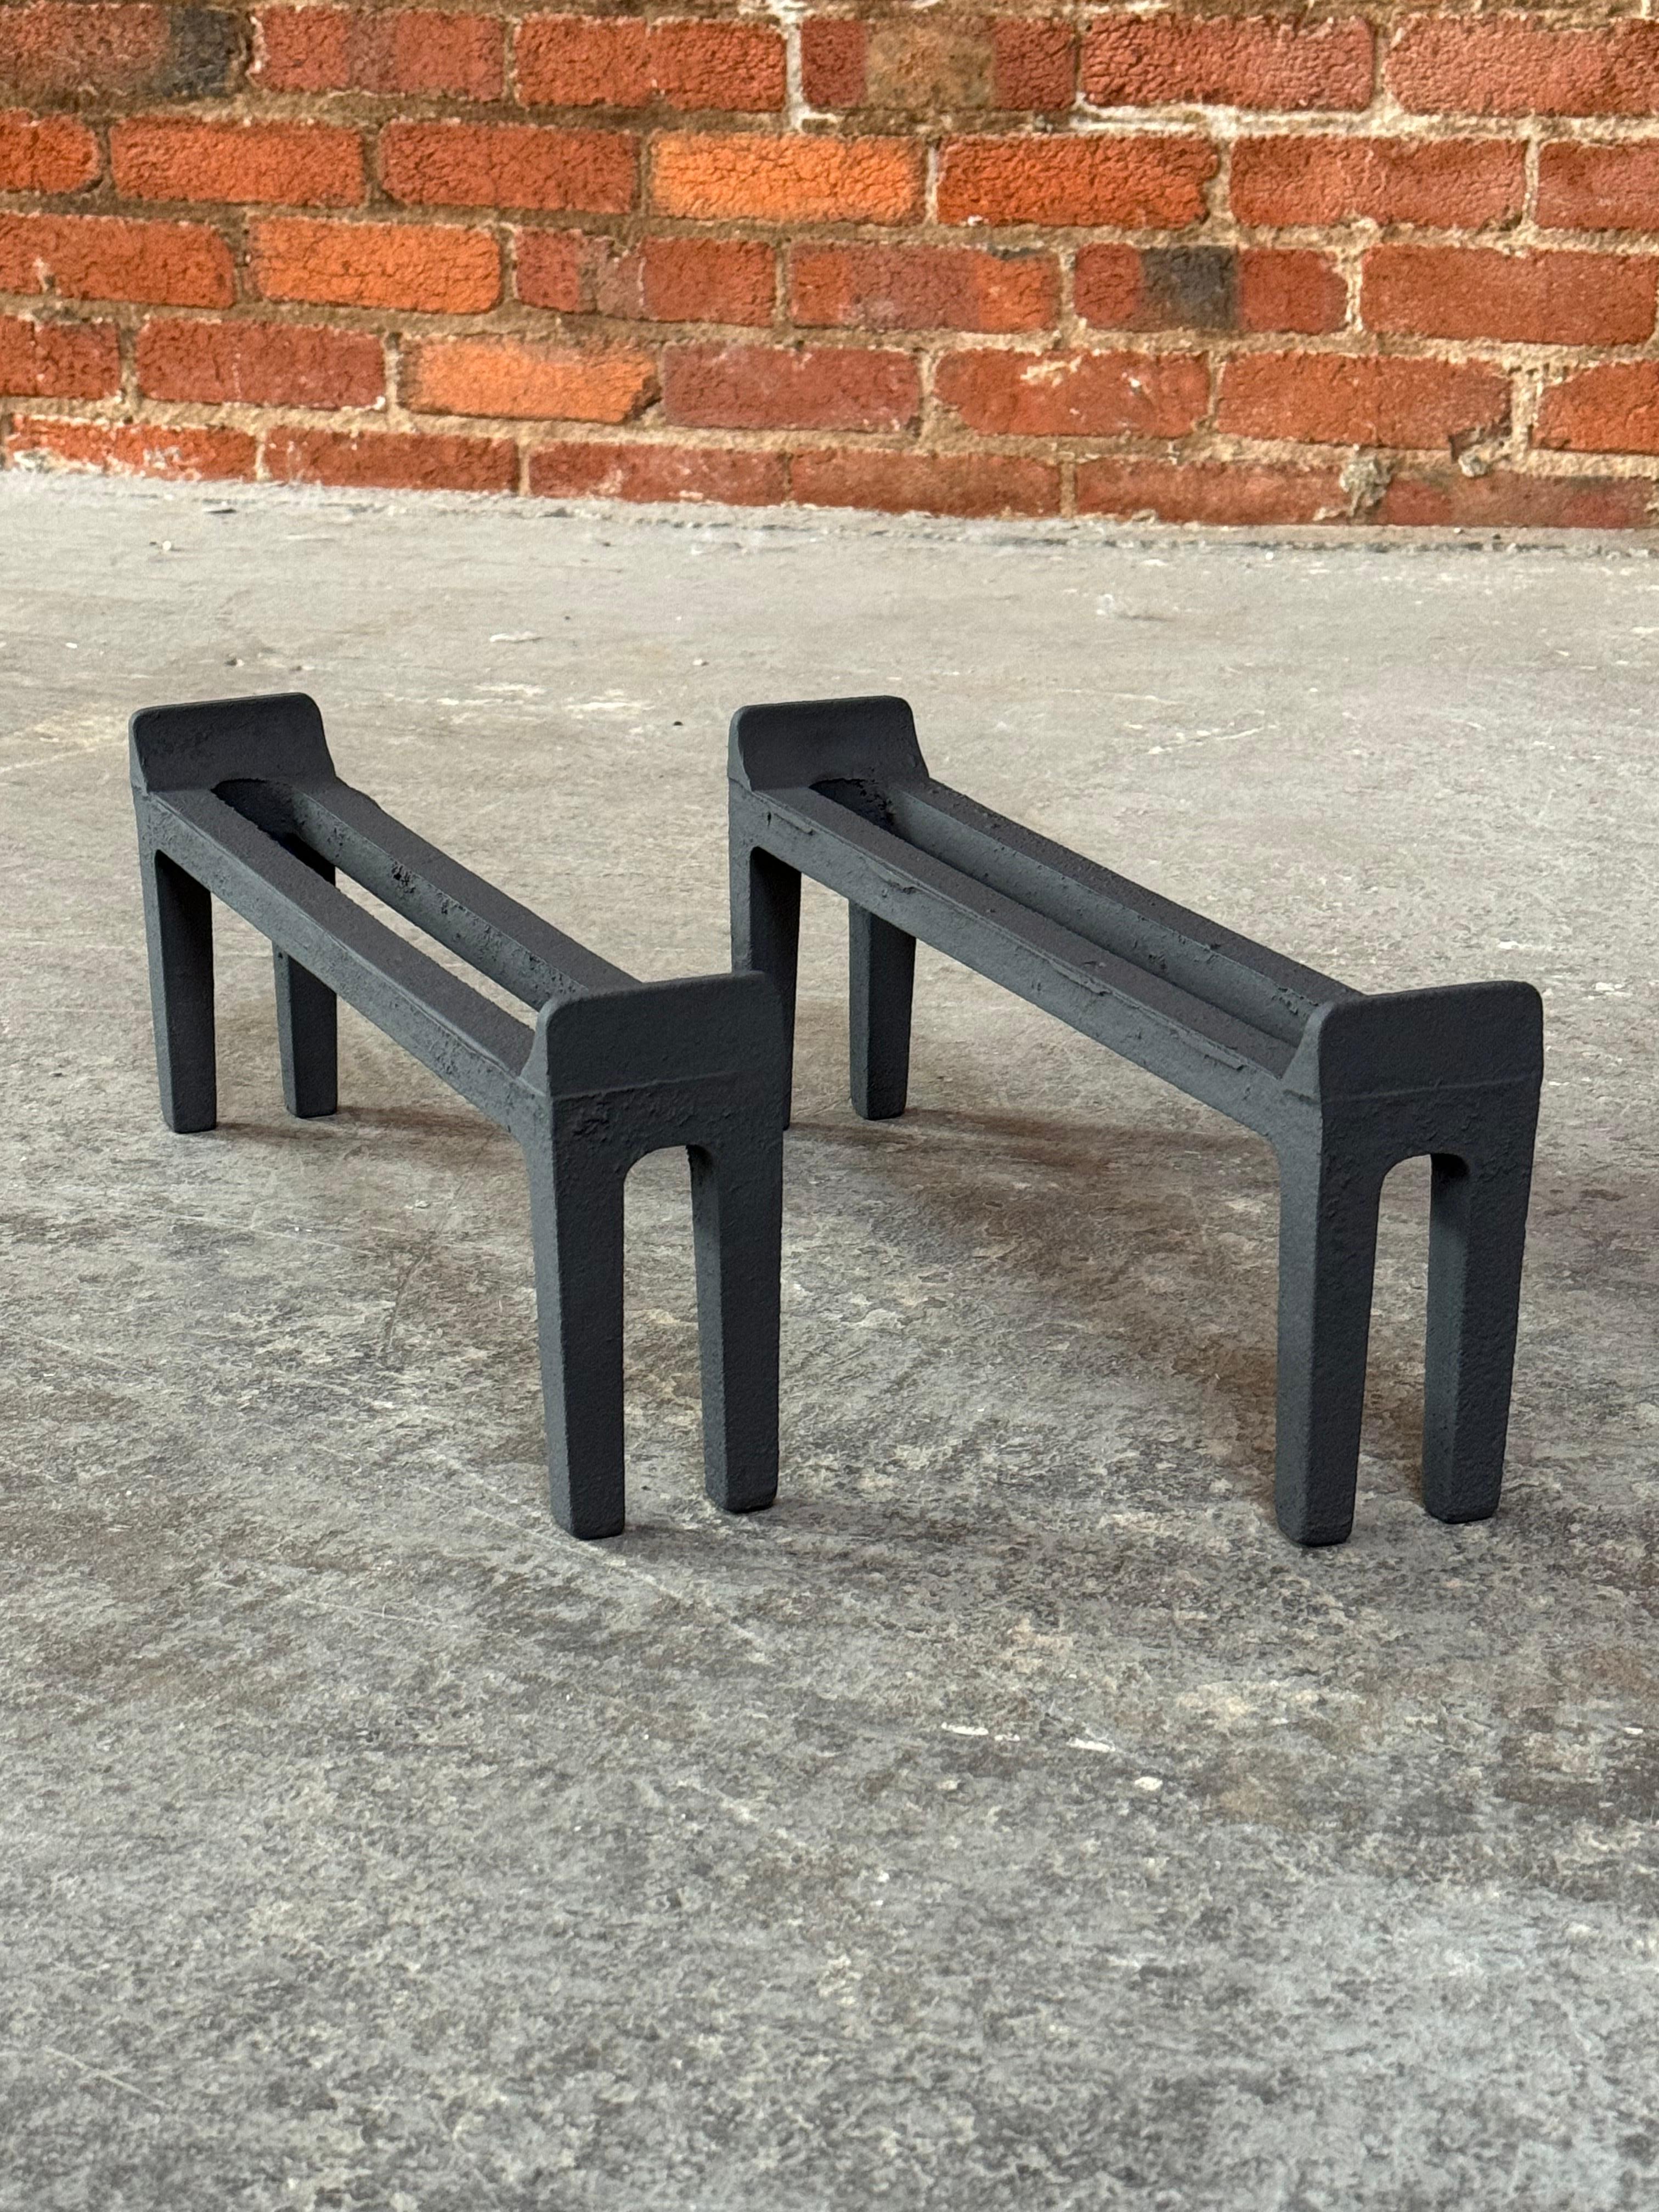 Modernist design andirons by the American company Peerless circa 1950s. A simple minimal design constructed of cast iron and treated with a high temperature rated ceramic based paint in a flat black finish. The design has a parallel bar center with